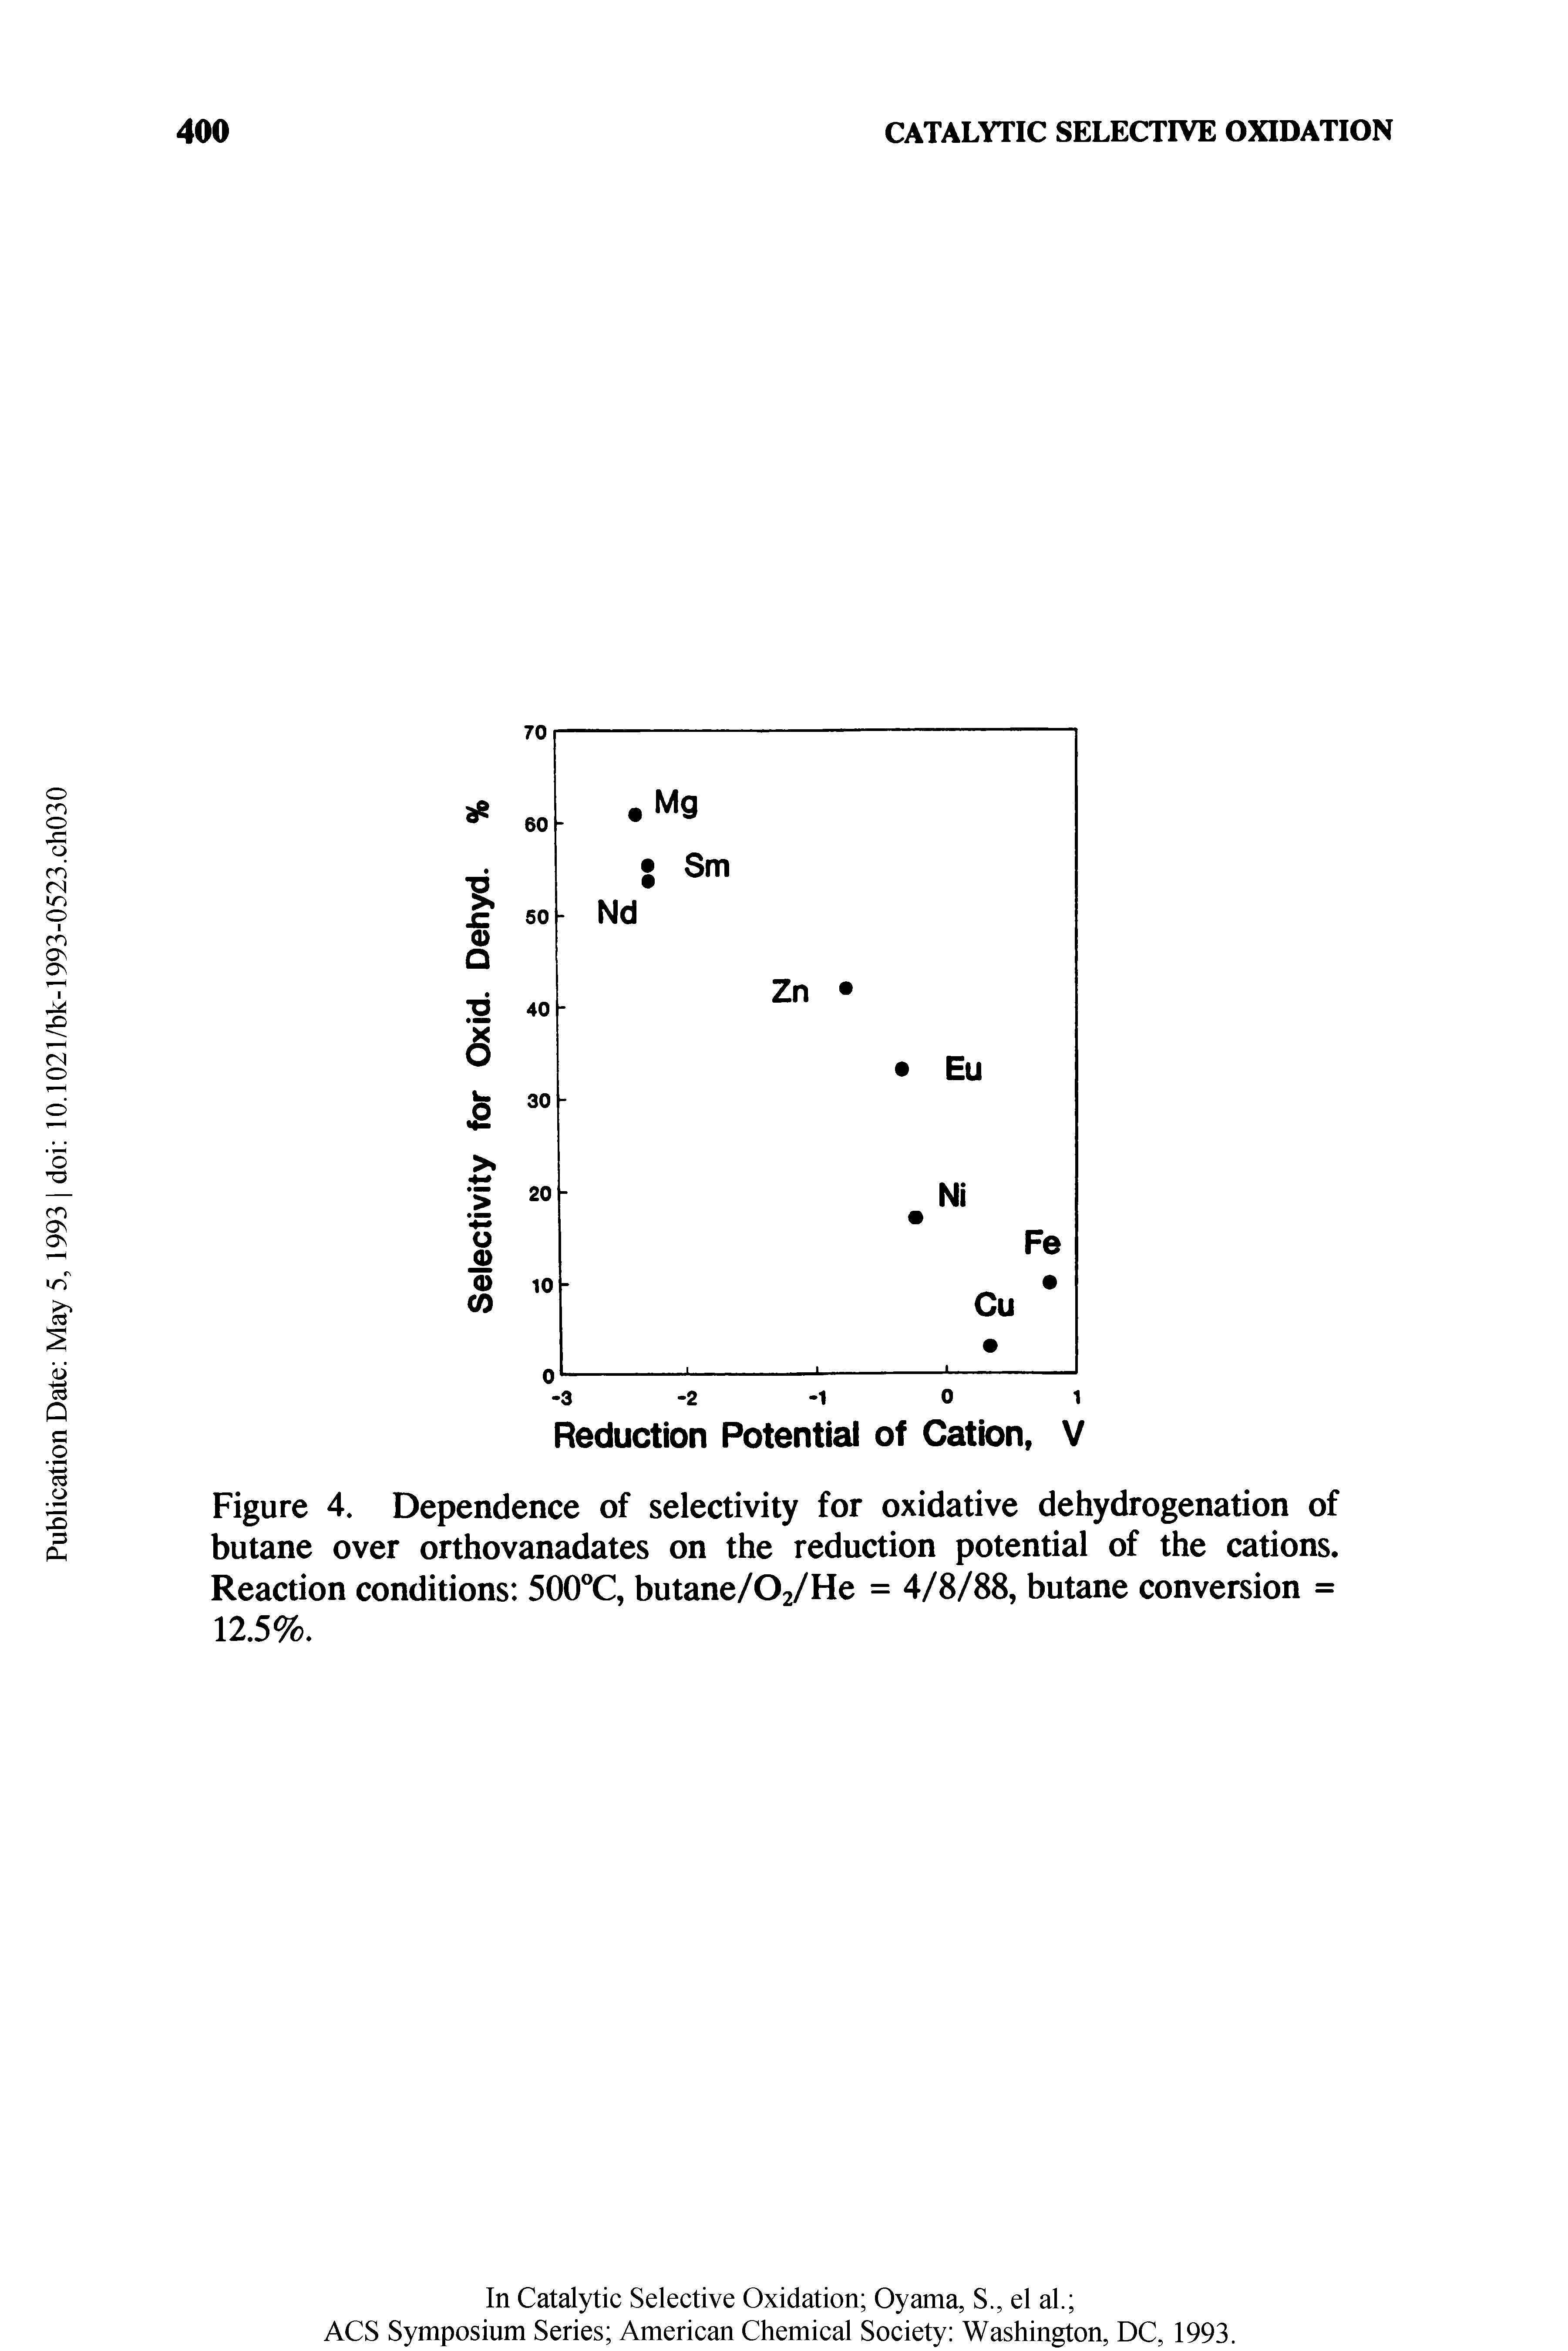 Figure 4. Dependence of selectivity for oxidative dehydrogenation of butane over orthovanadates on the reduction potential of the cations. Reaction conditions 500°C, butane/Oz/He = 4/8/88, butane conversion = 12.5%.